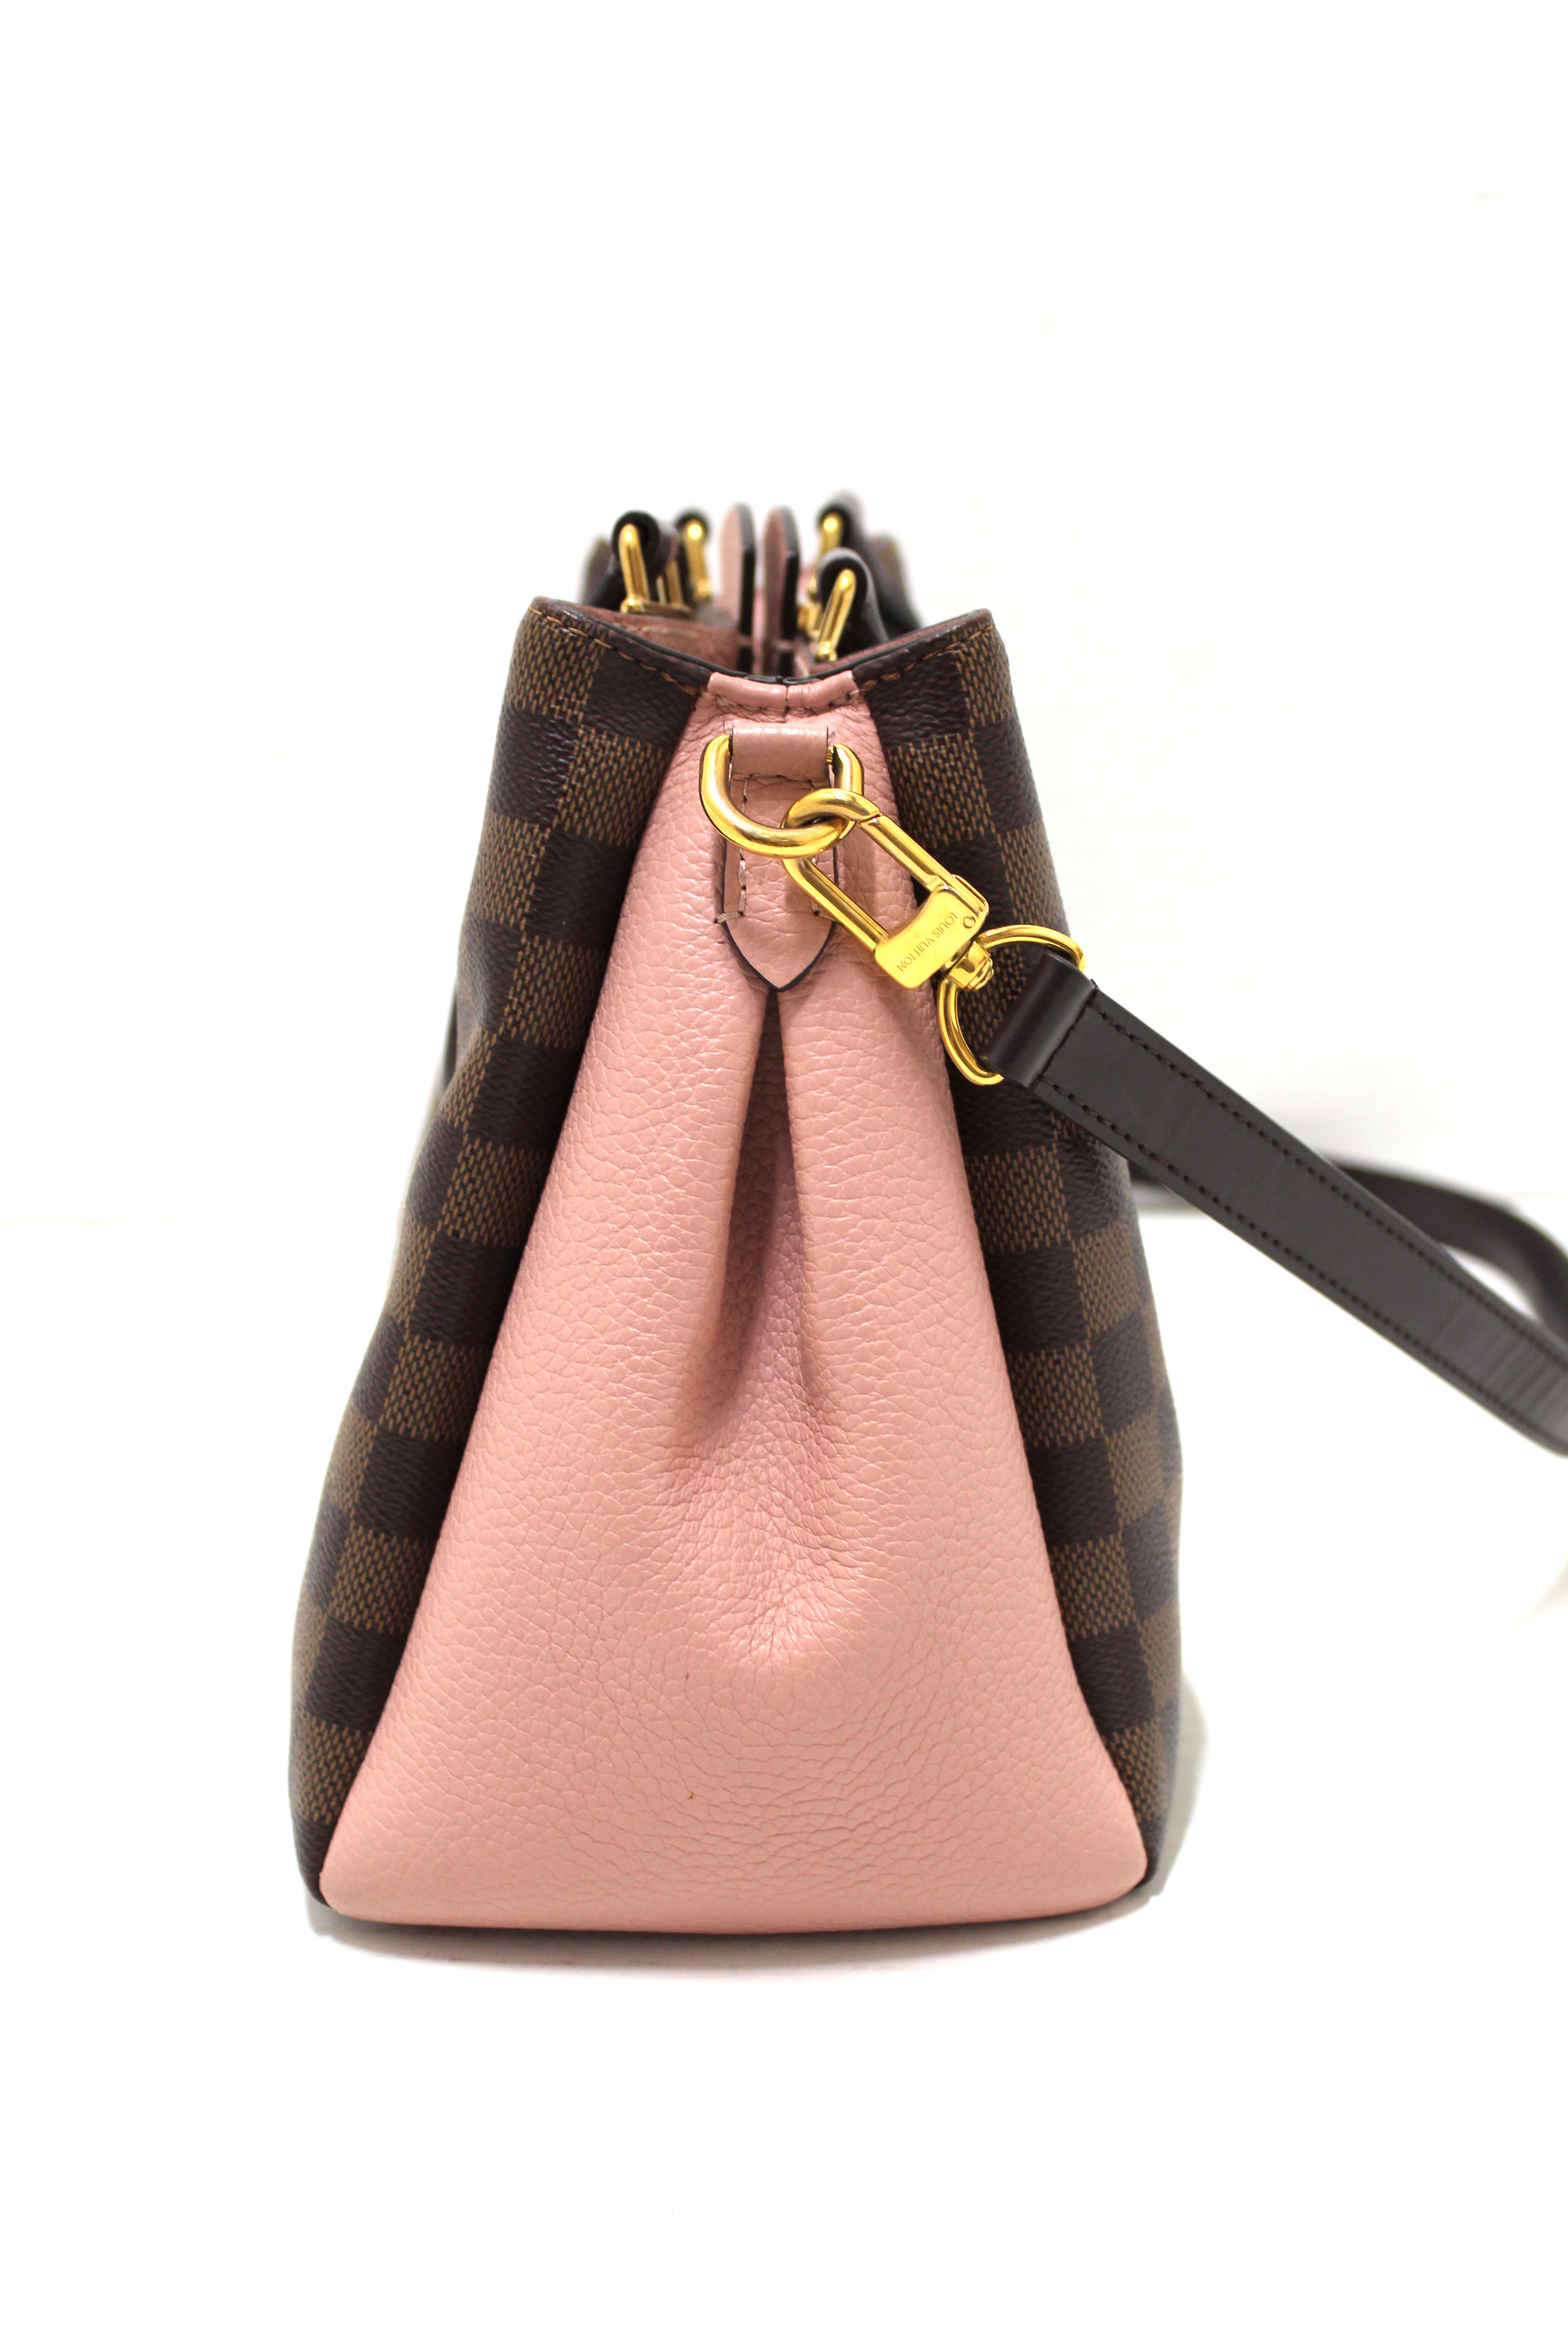 Louis Vuitton Brittany Damier Ebene Coated Canvas Top Handle Bag on SALE